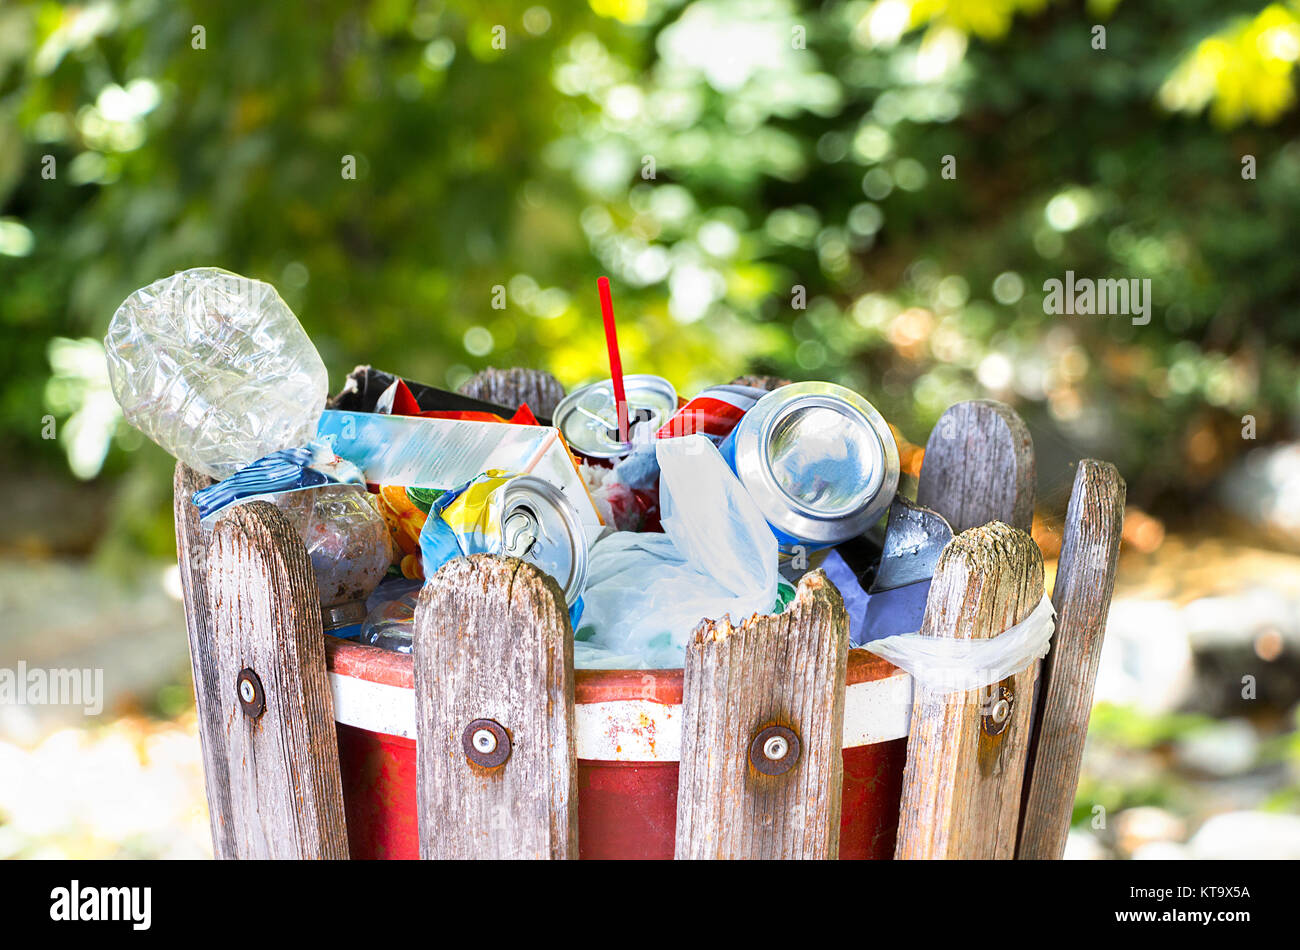 A wooden garbage bin outside in a park full with plastic bottles, cans, paper and plastic bags. Stock Photo